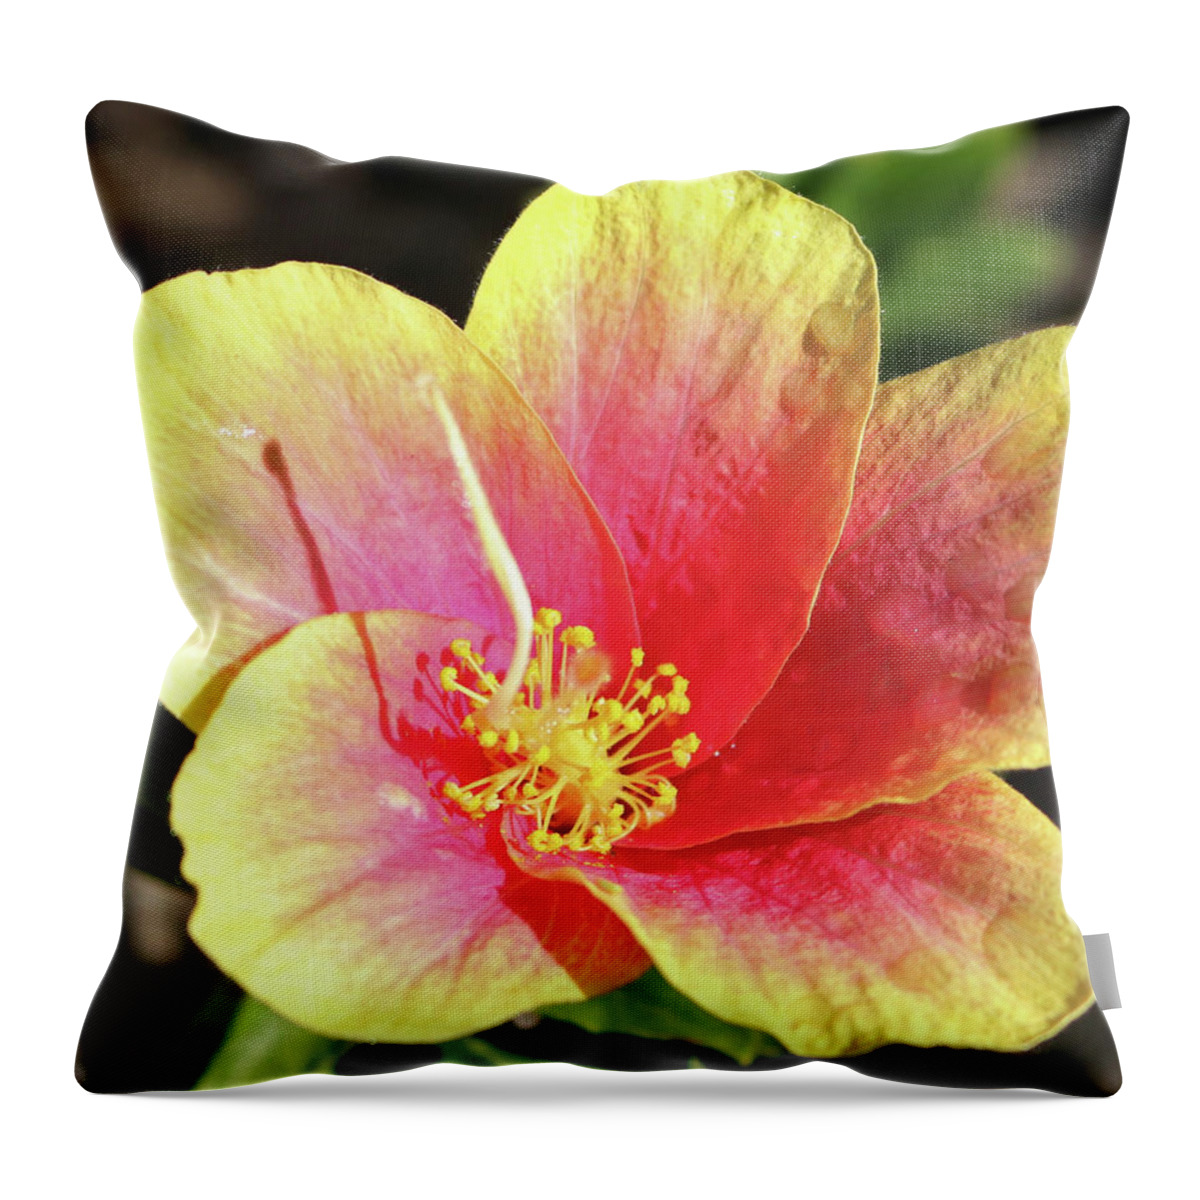 Flowers Throw Pillow featuring the pyrography Reaching for the Sun by Tony Spencer